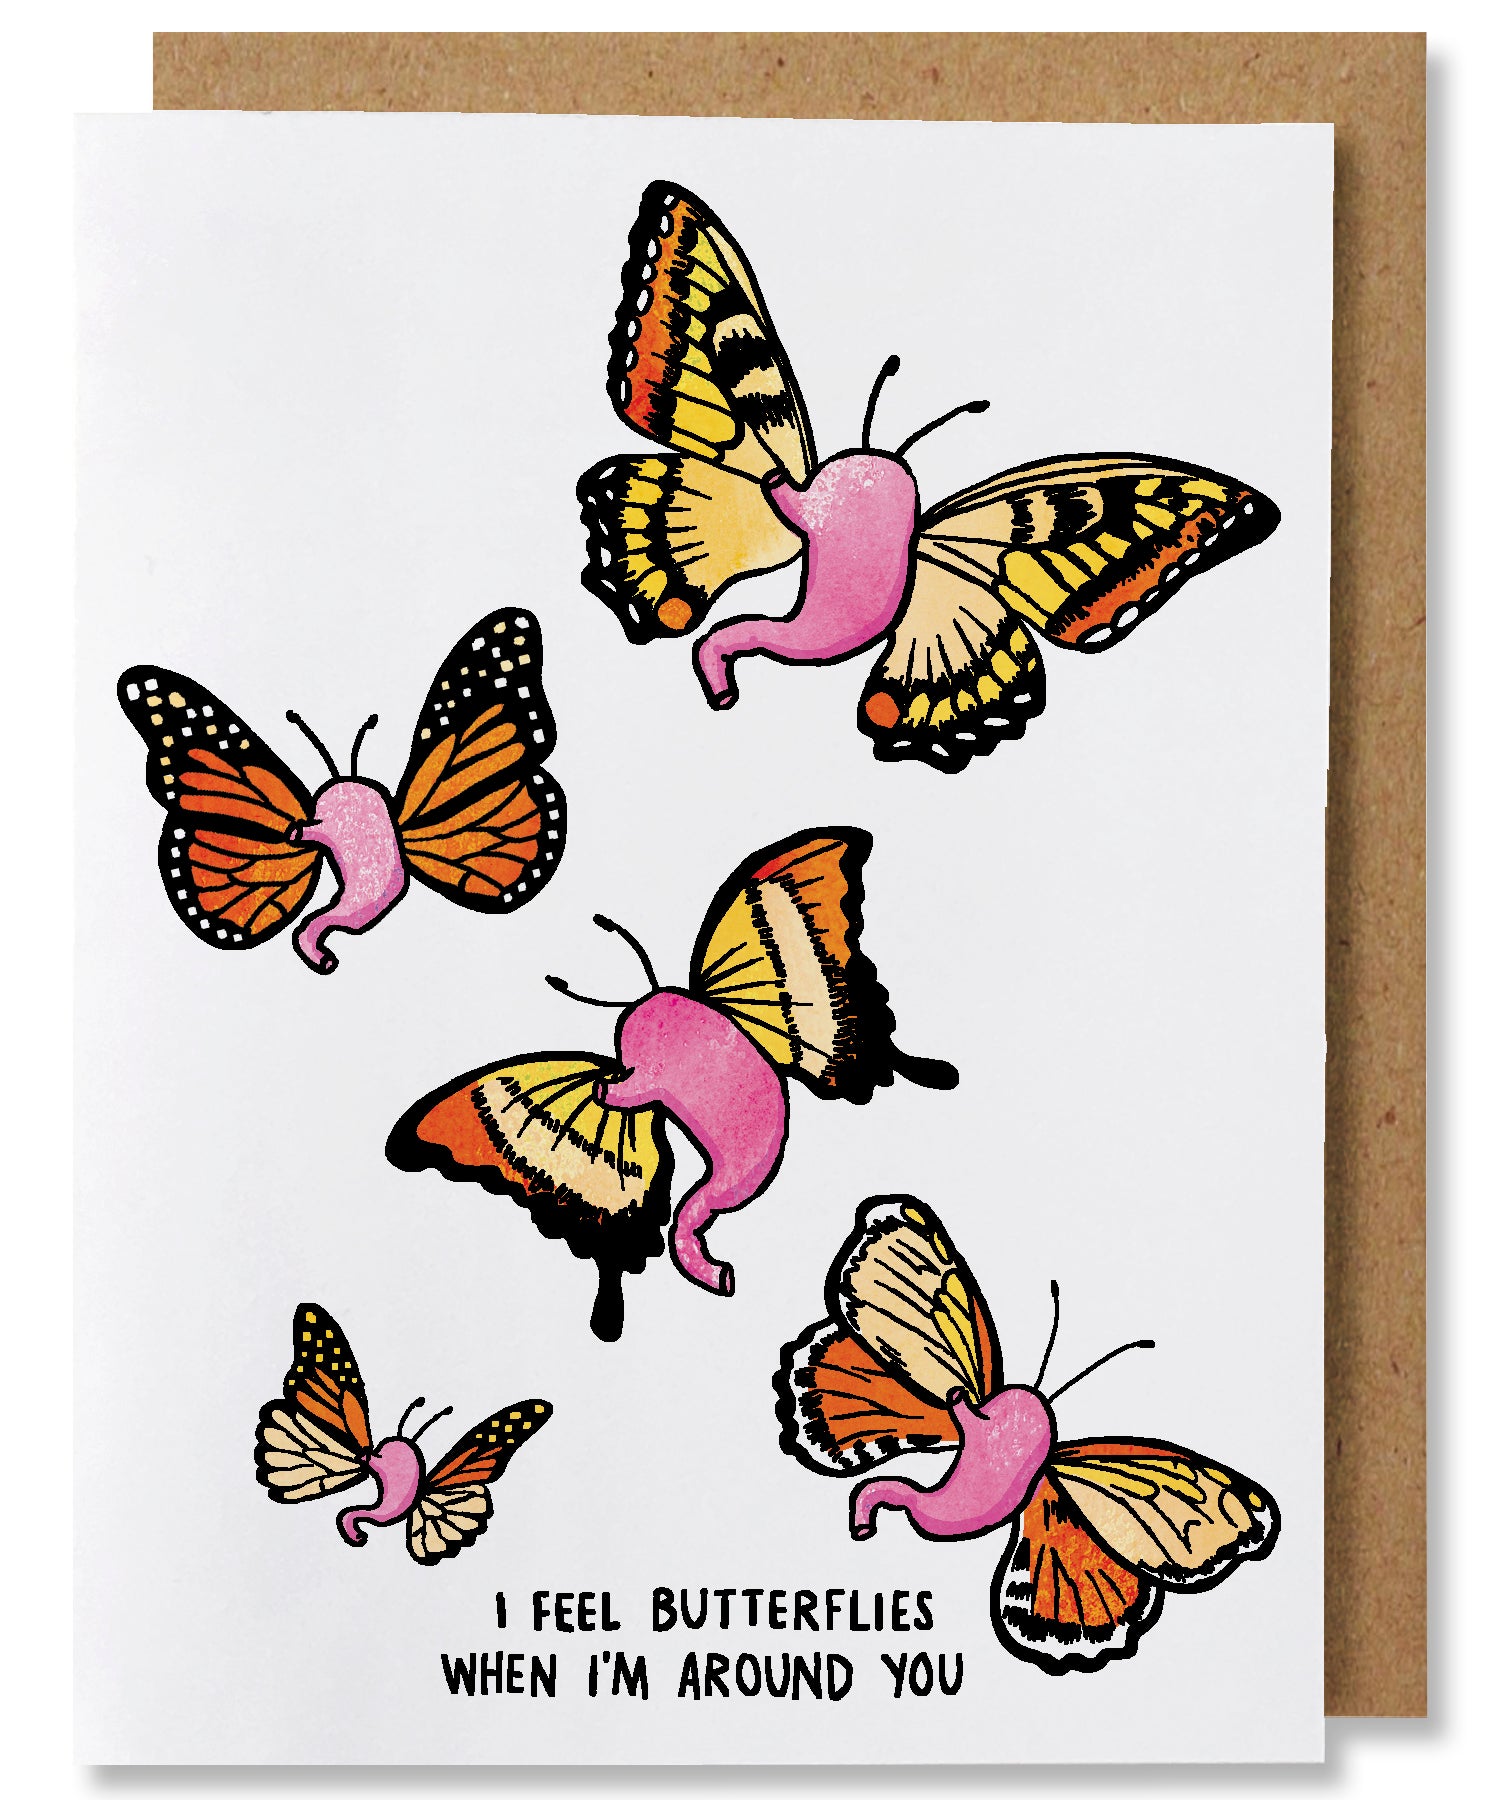 I Feel Butterflies is a white ground greeting card that features5 pink stomachs with yellow and orange butterfly wings. The words beneath say "I feel butterflies when I'm around you". This card is paired with a brown kraft envelope